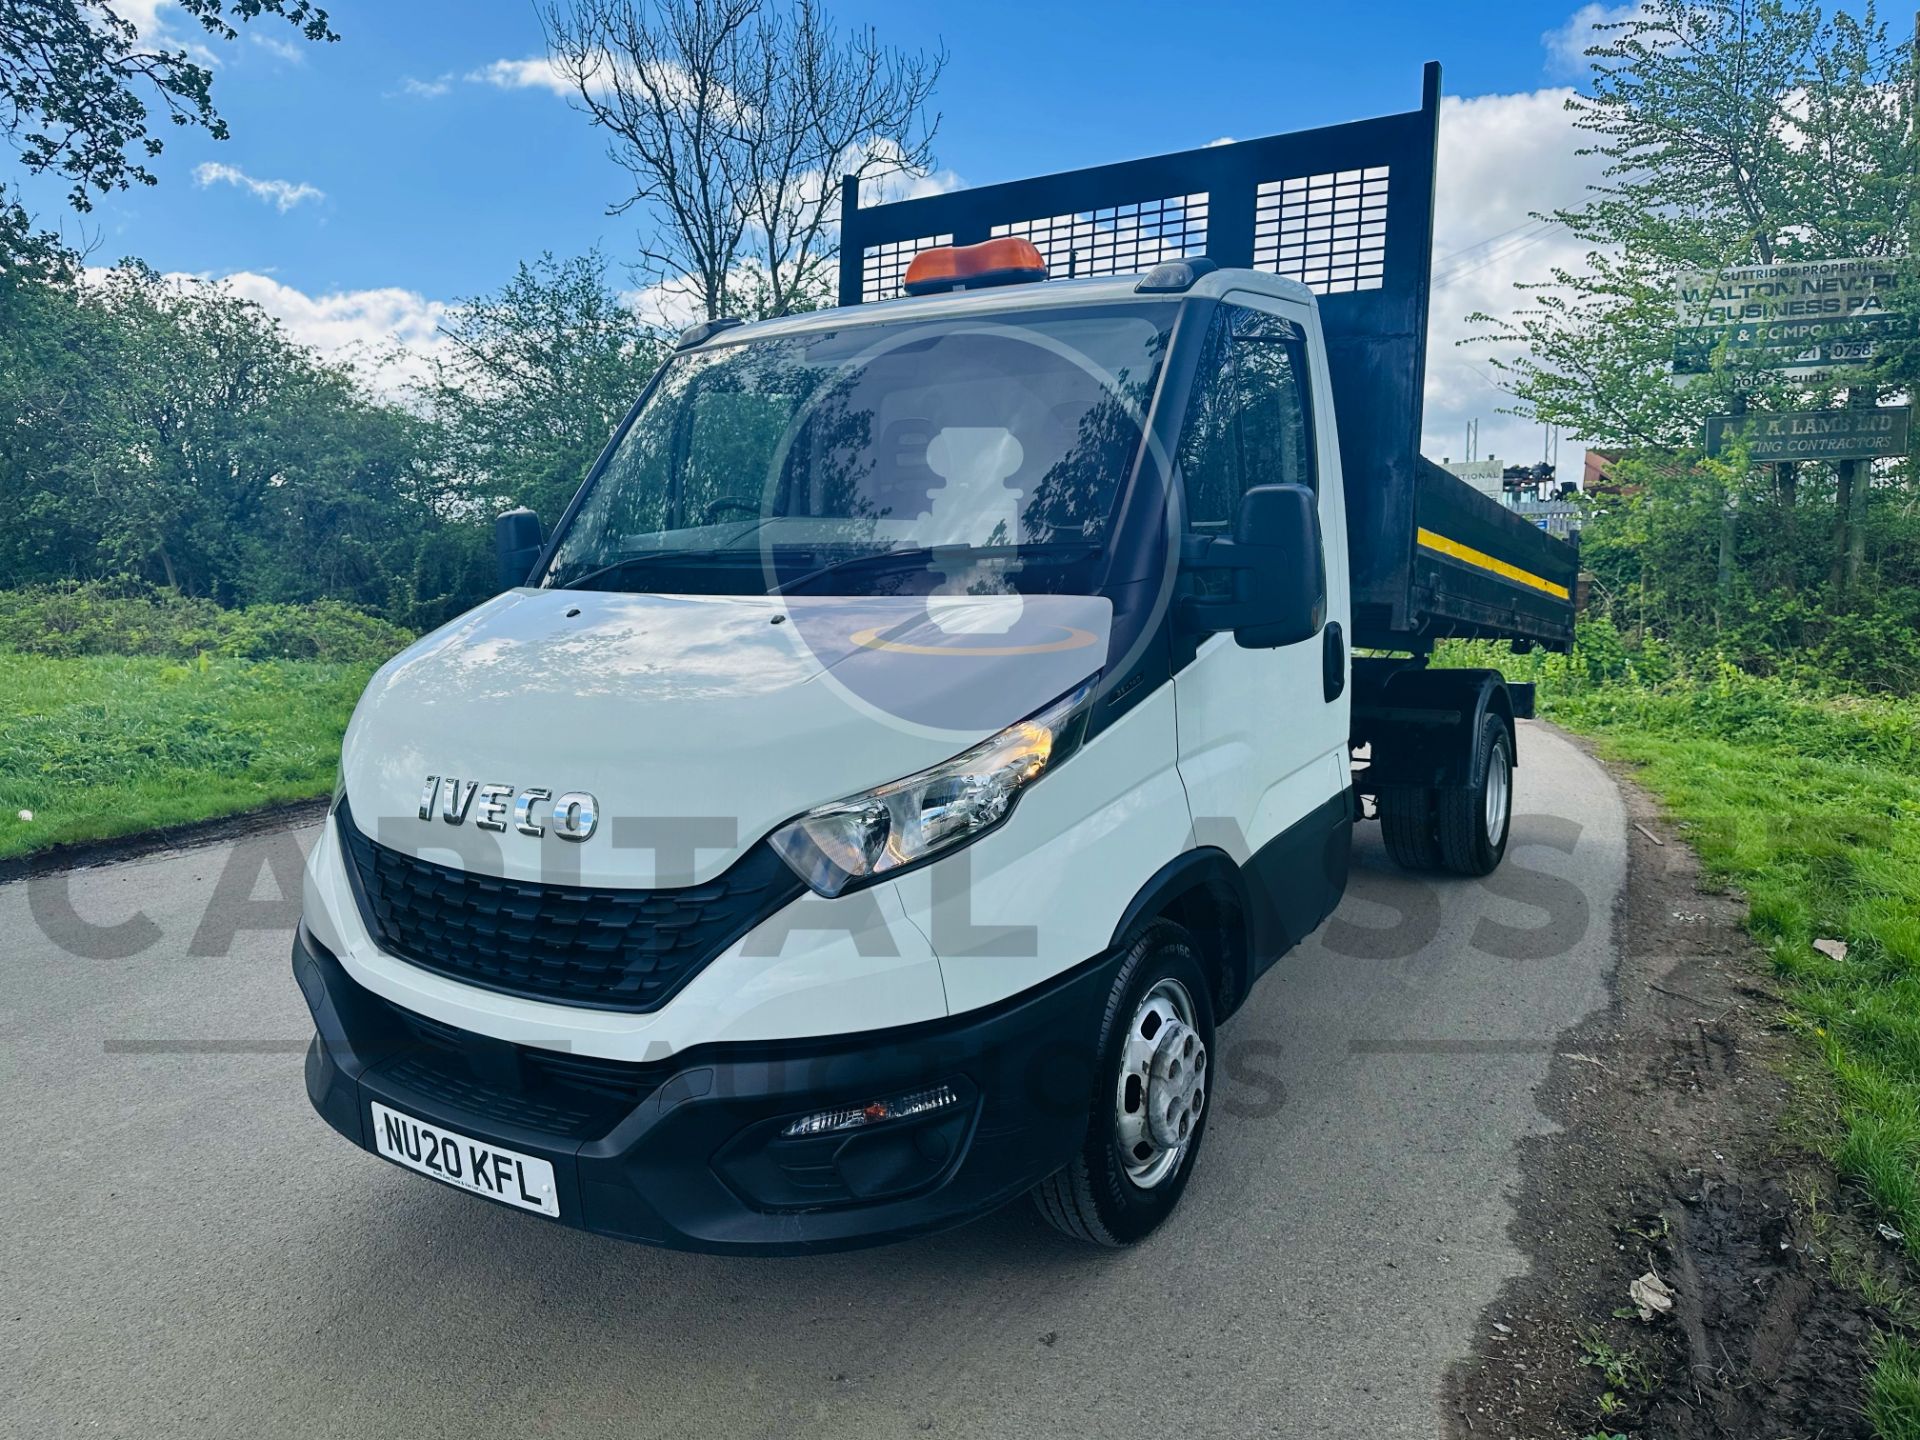 (ON SALE) IVECO DAILY 35C14 *SINGLE CAB - TIPPER TRUCK* (2020 - EURO 6) 2.3 DIESEL - (3500 KG) - Image 4 of 28